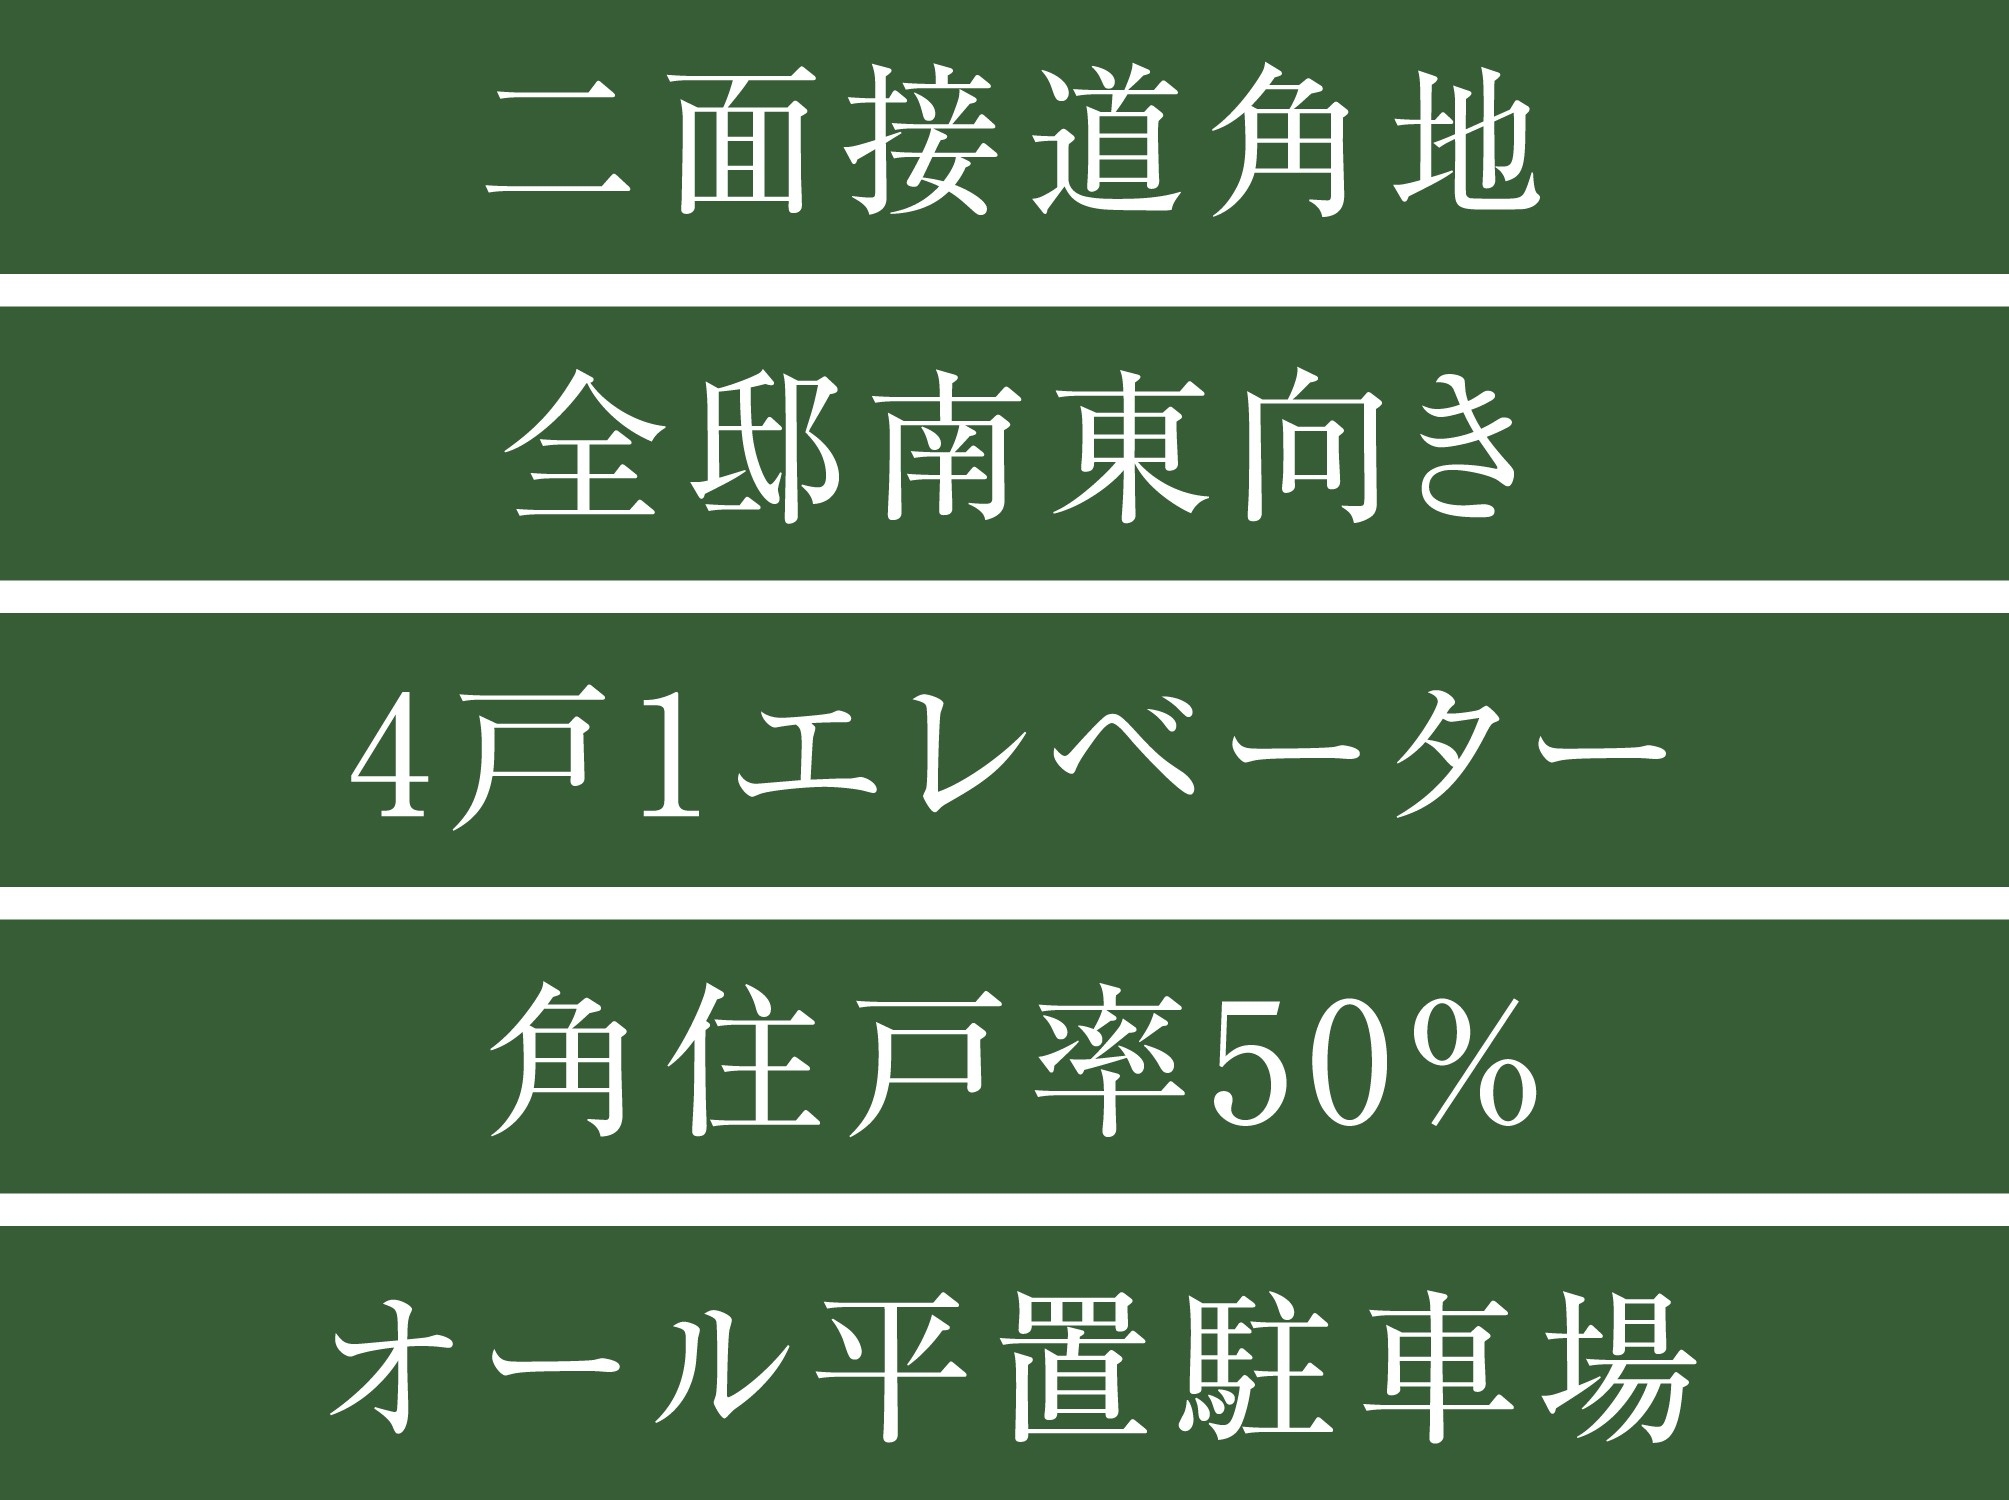 Features of <Puremisuto Kasai> Property. I'm glad that all have become flat 置駐 car parking in the parking site.